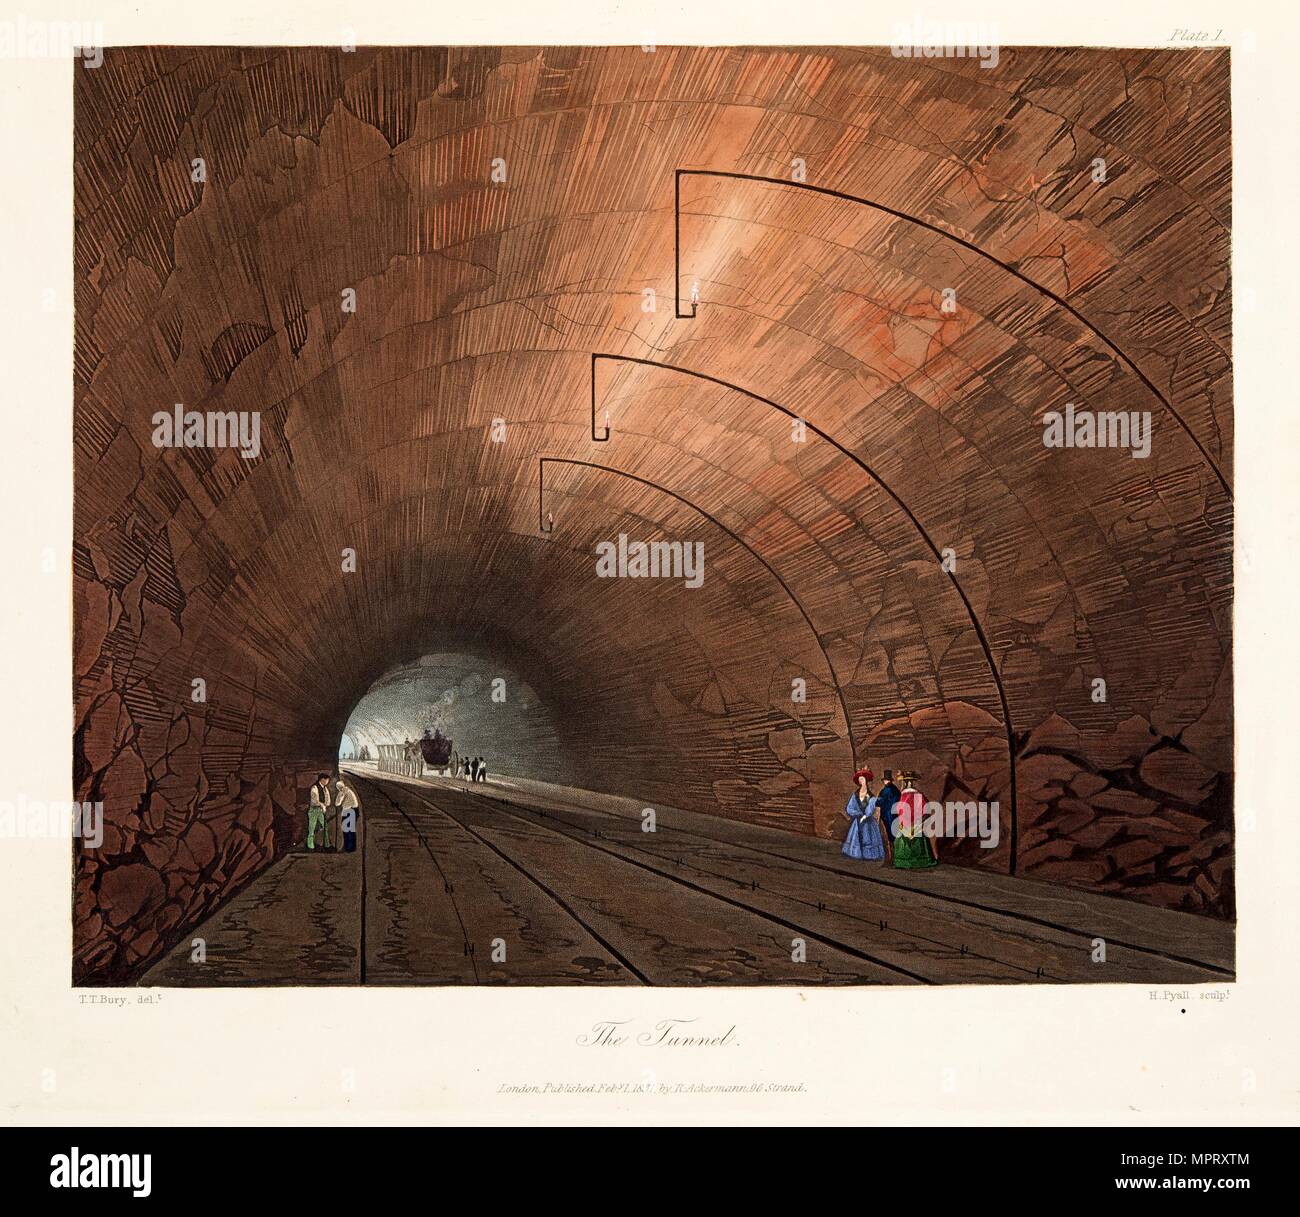 The Tunnel, published 1831 (hand coloured engraving) Stock Photo